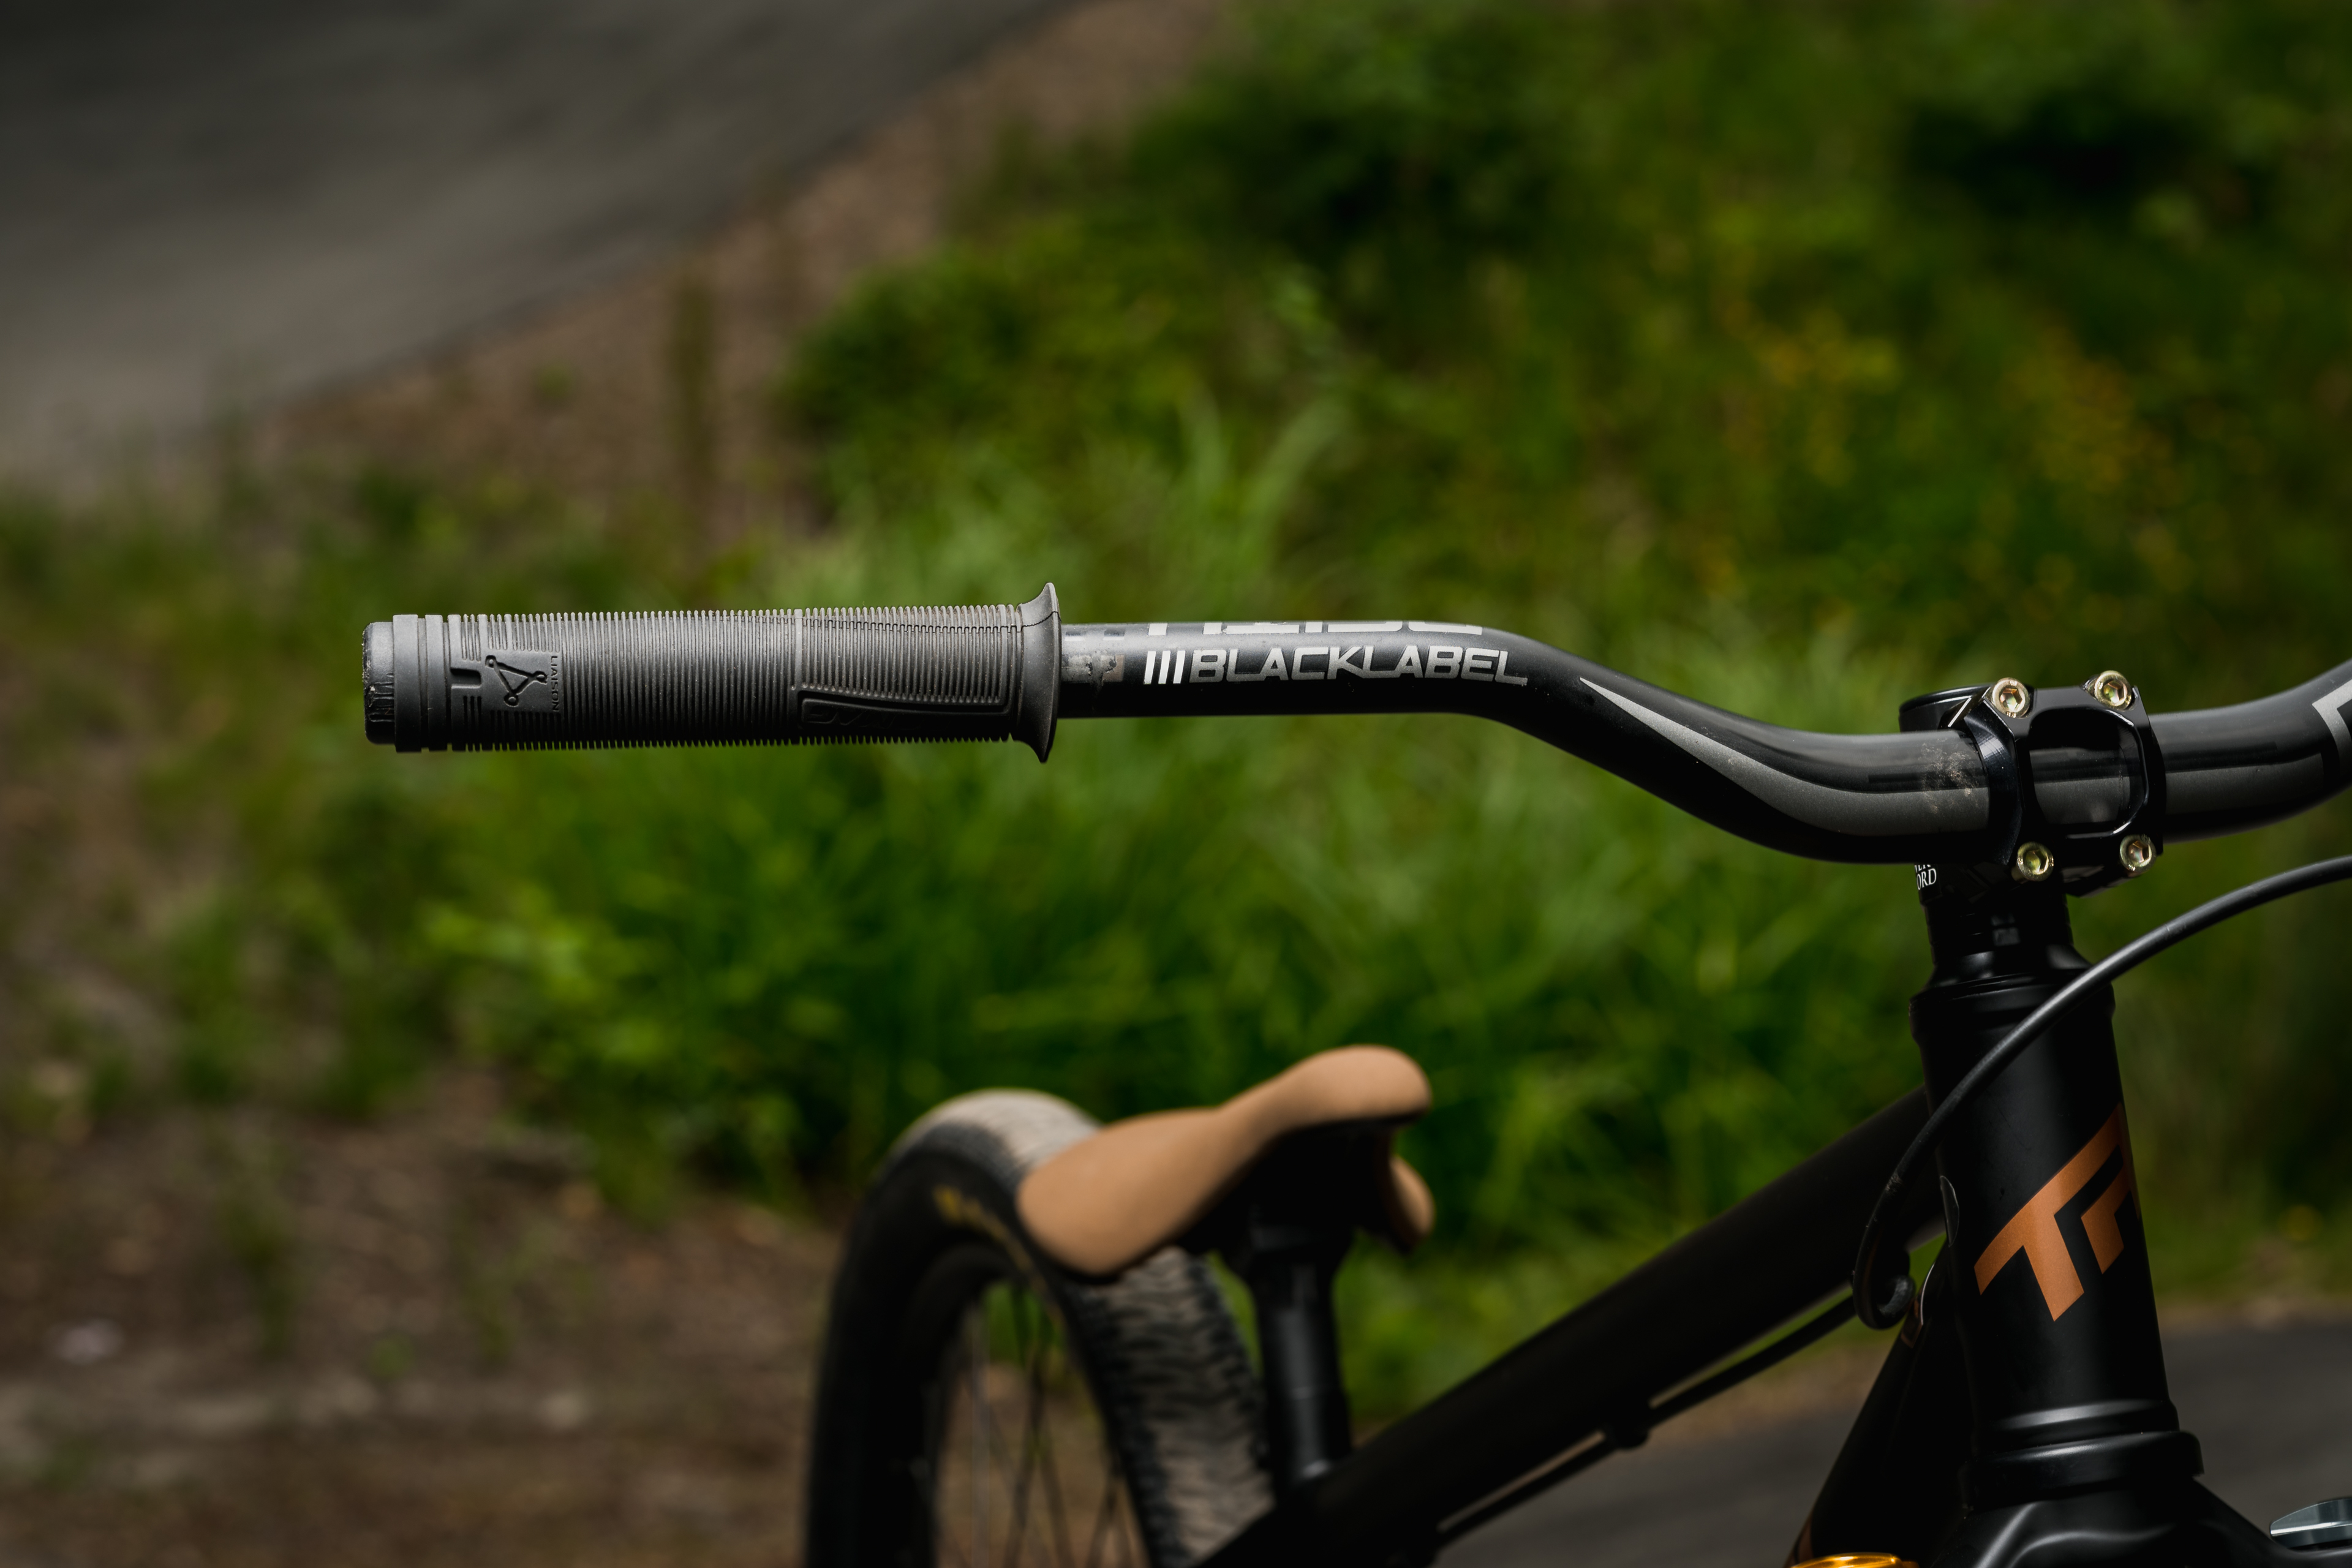 Chromag Wax grips and Deity Black Label 38mm rise handlebar shot by A.J. Barlas at the Squamish Casino pumptrack